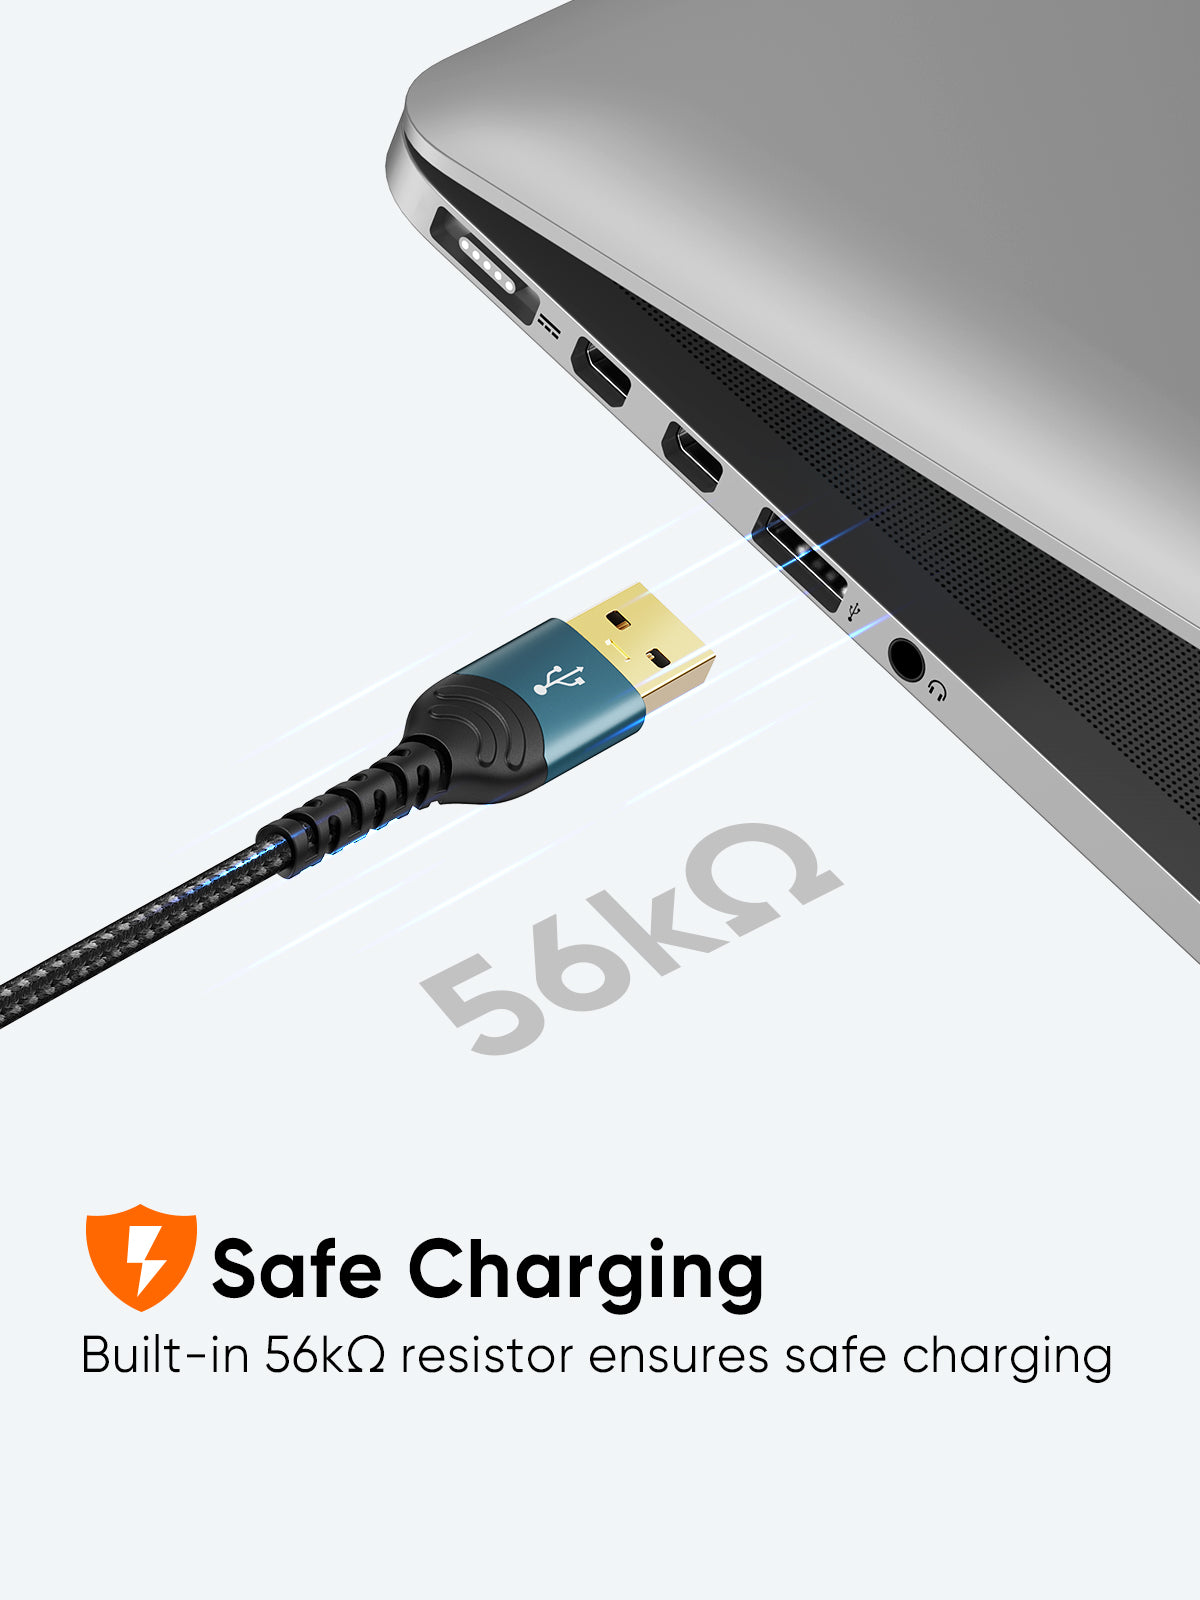 usb-a to usb-c charging cable 56k ohm resistor